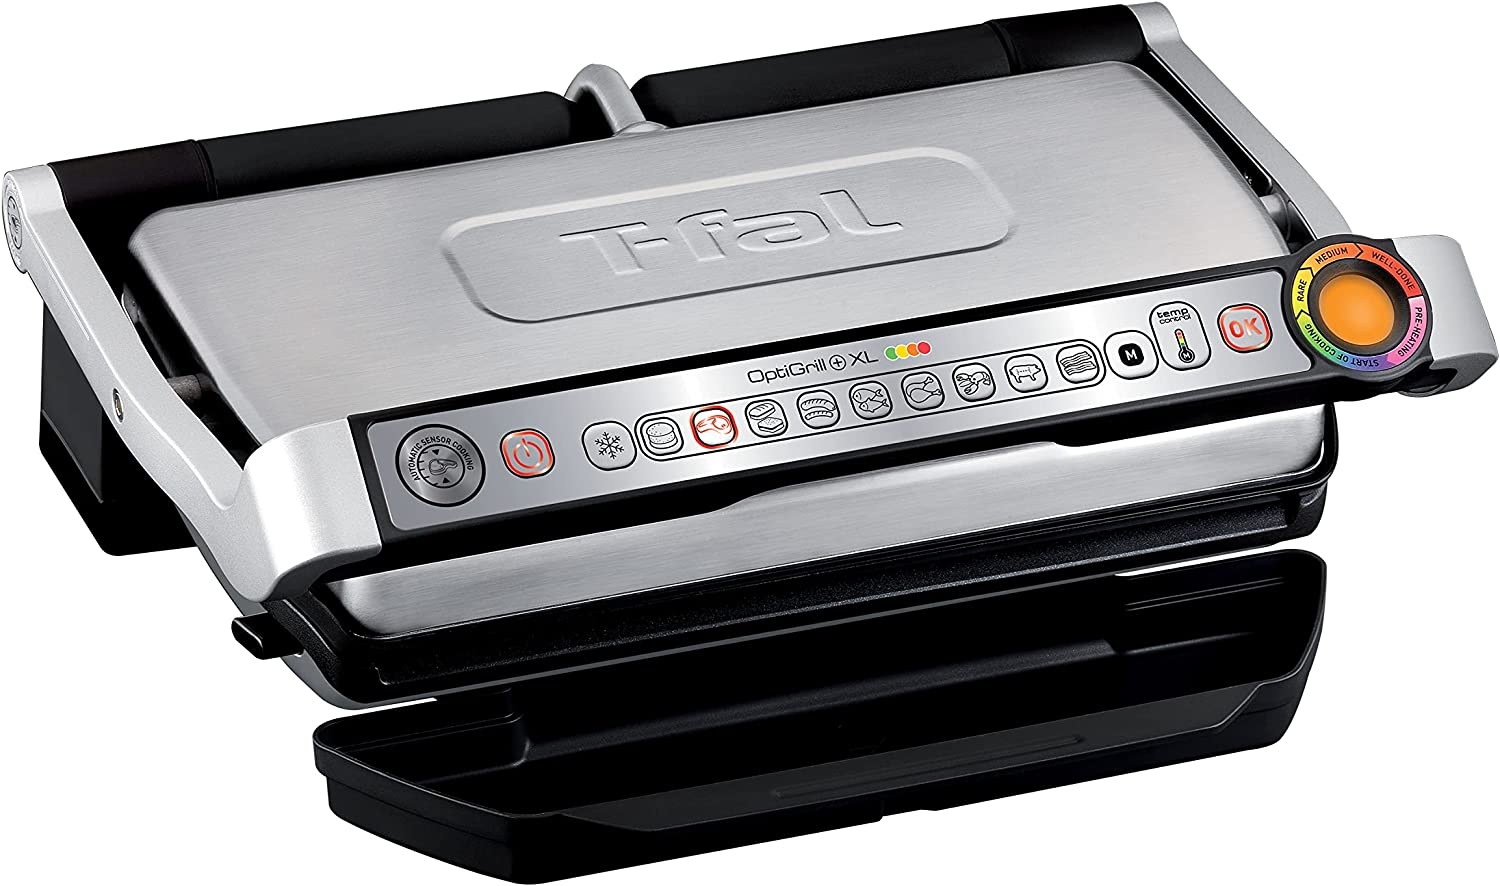 T-fal GC7 Opti-Grill Indoor Electric Grill, 4-Servings, Automatic Sensor Cooking, Silver Import To Shop ×Product customization